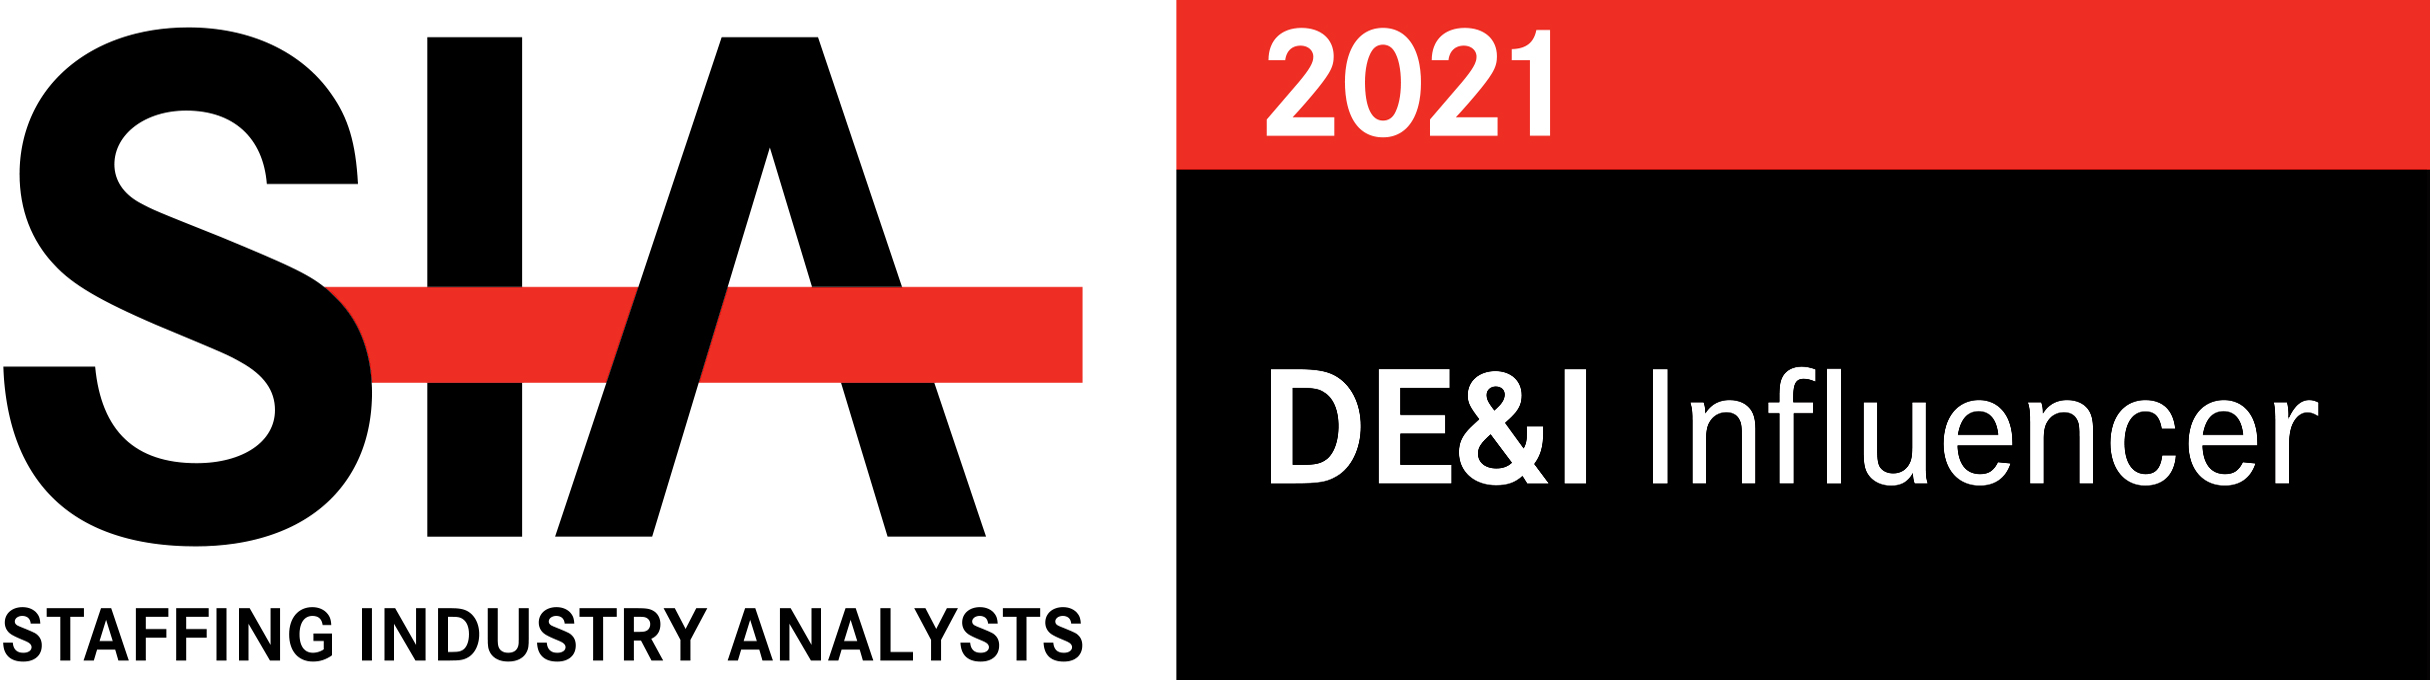 SIA Staffing Industry Analysts 2021 DE&I Influencer